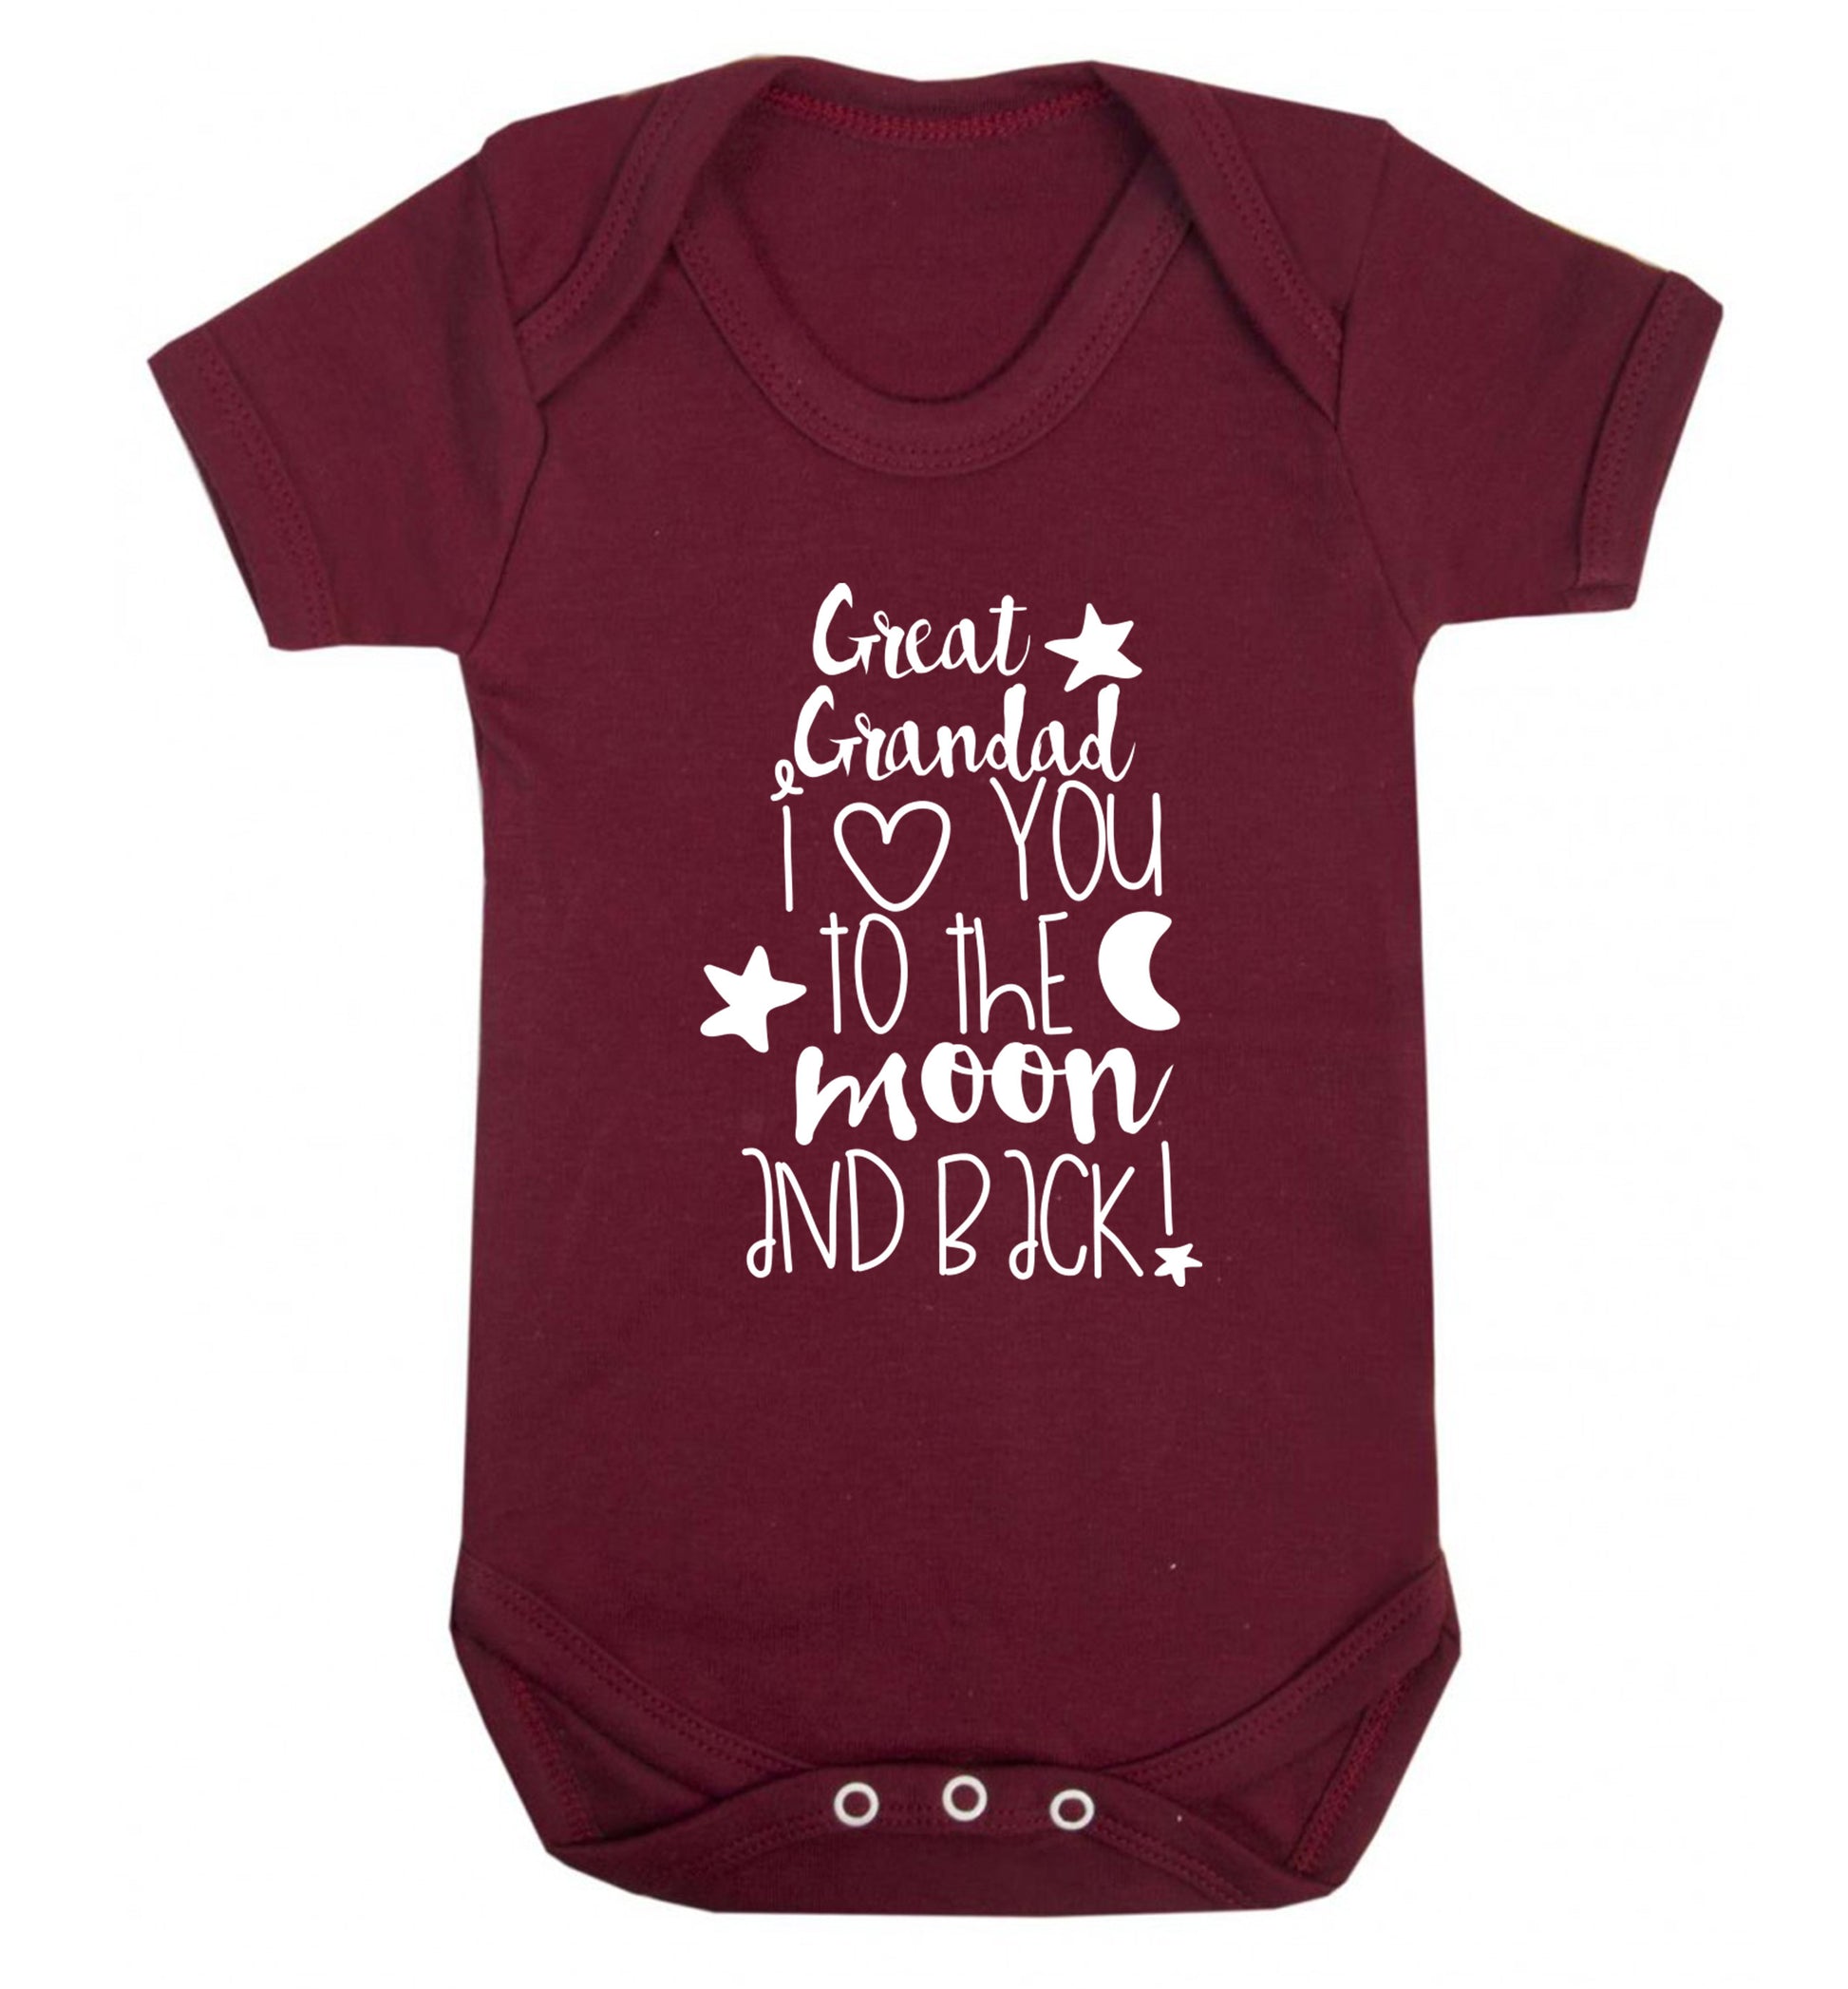 Great Grandad I love you to the moon and back Baby Vest maroon 18-24 months